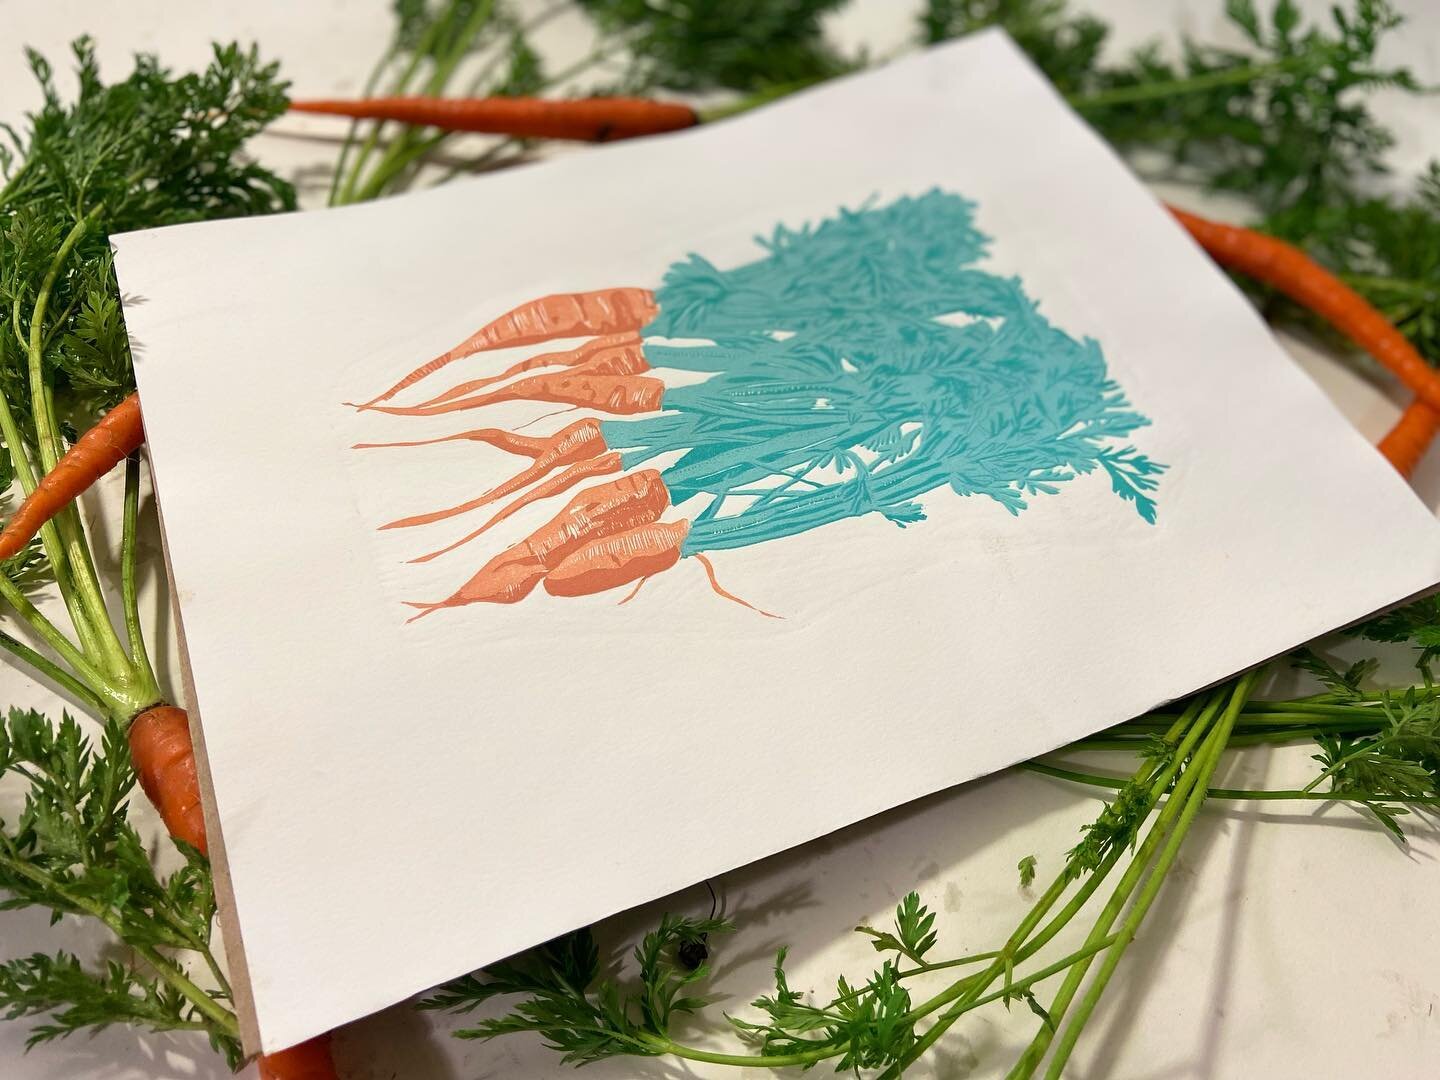 Any good carrot recipes this Thanksgiving? New winter grows prints for sale this weekend at Renegade Craft Austin! Come by and say hello 👋🏻 

#printmaking #printmaker #printisnotdead #reliefprint #reductionprint #austinartist